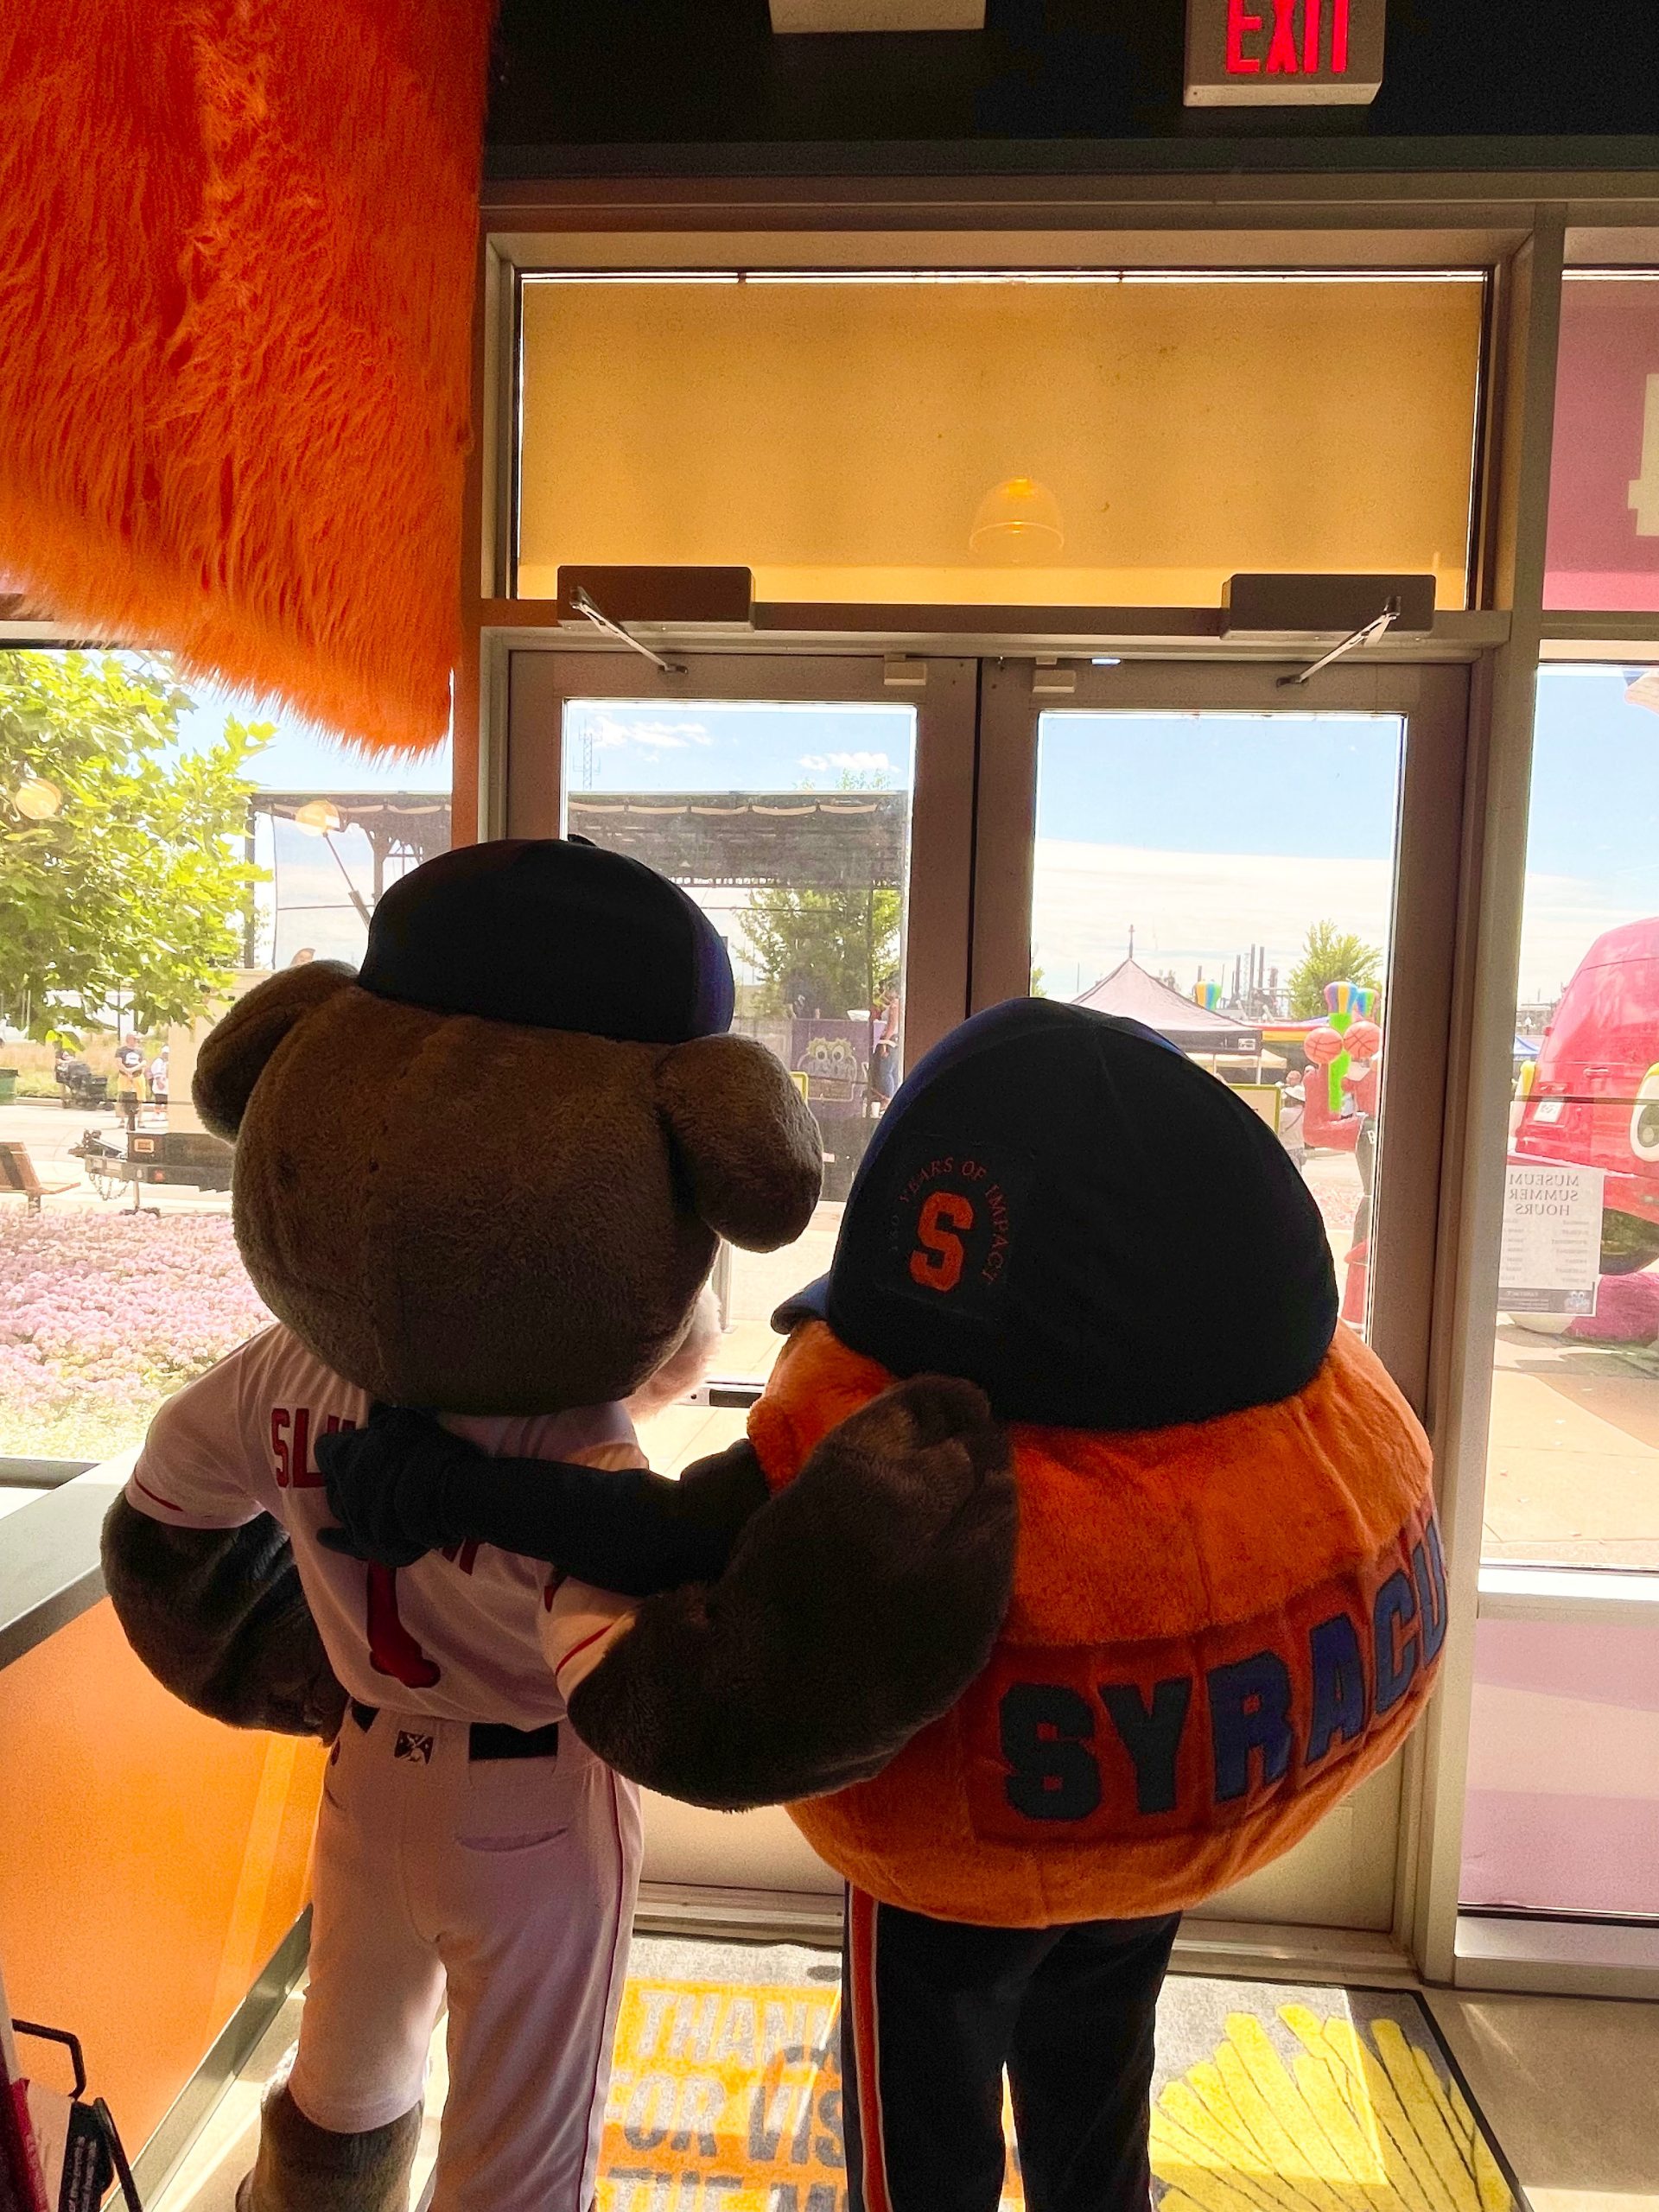 Slugger the Sea Dog and Otto the Orange standing arm and arm waiting to go through a set of double doors.